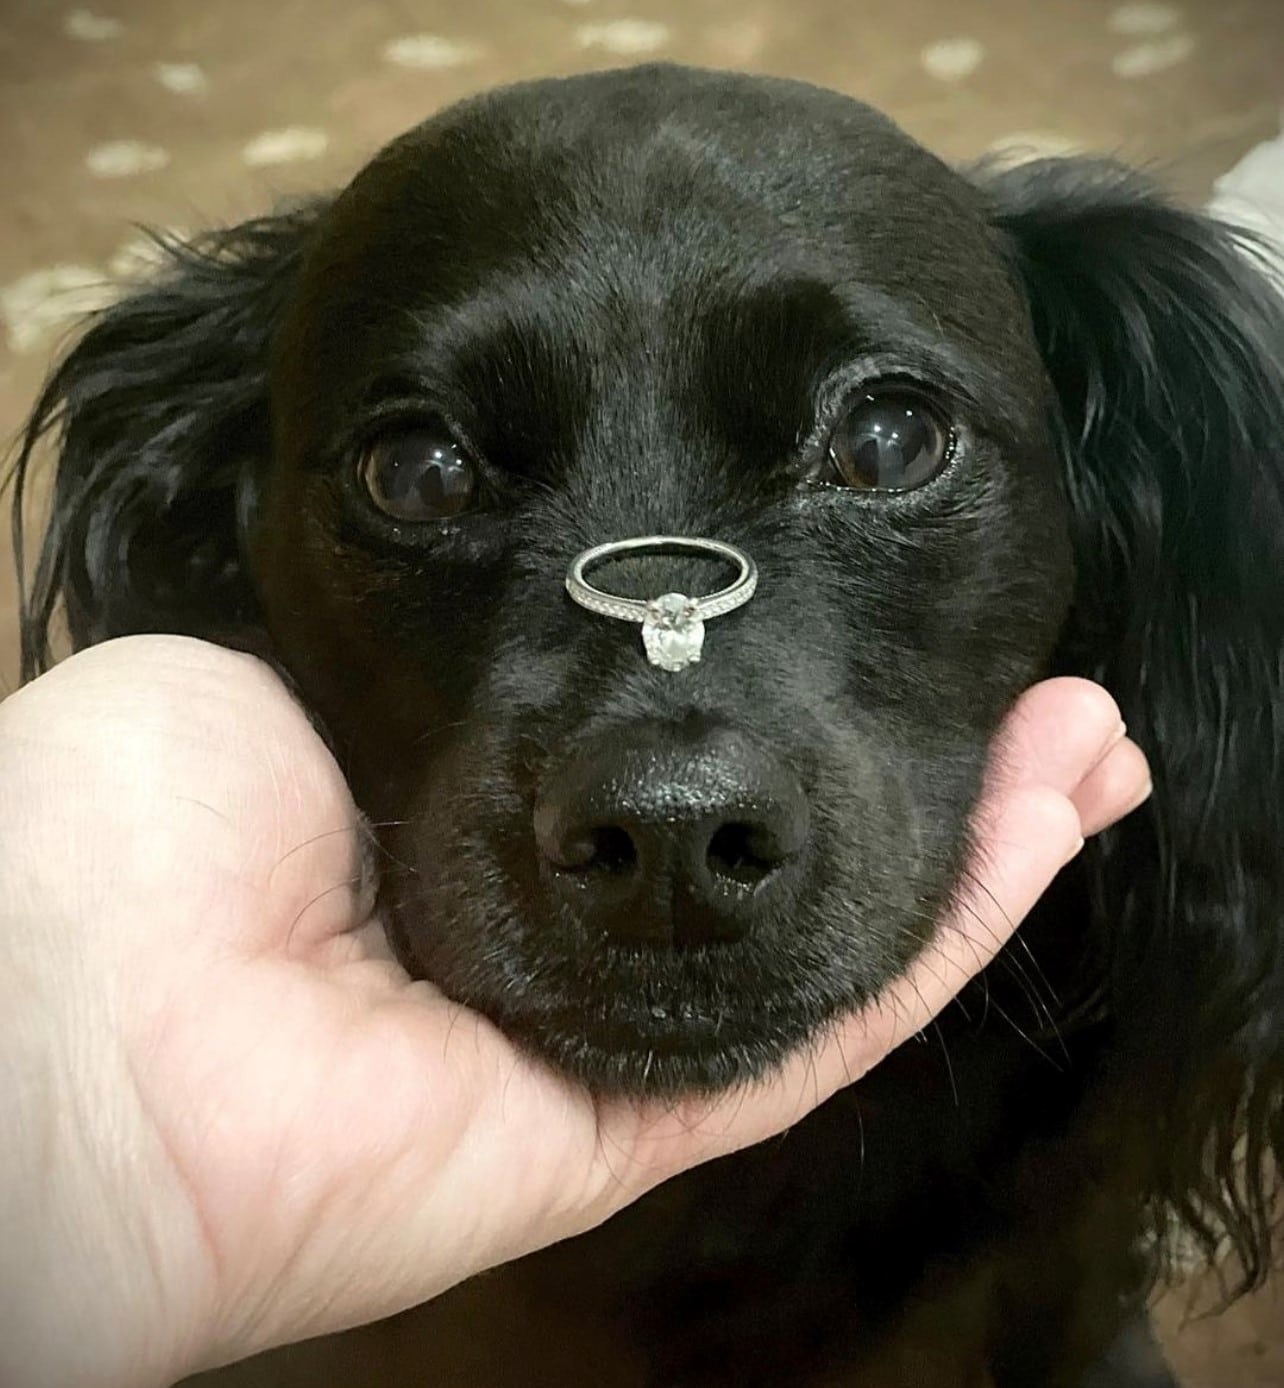 engagement ring sits on the nose of a black fluffy dog while a human hand holds their head up to the camera